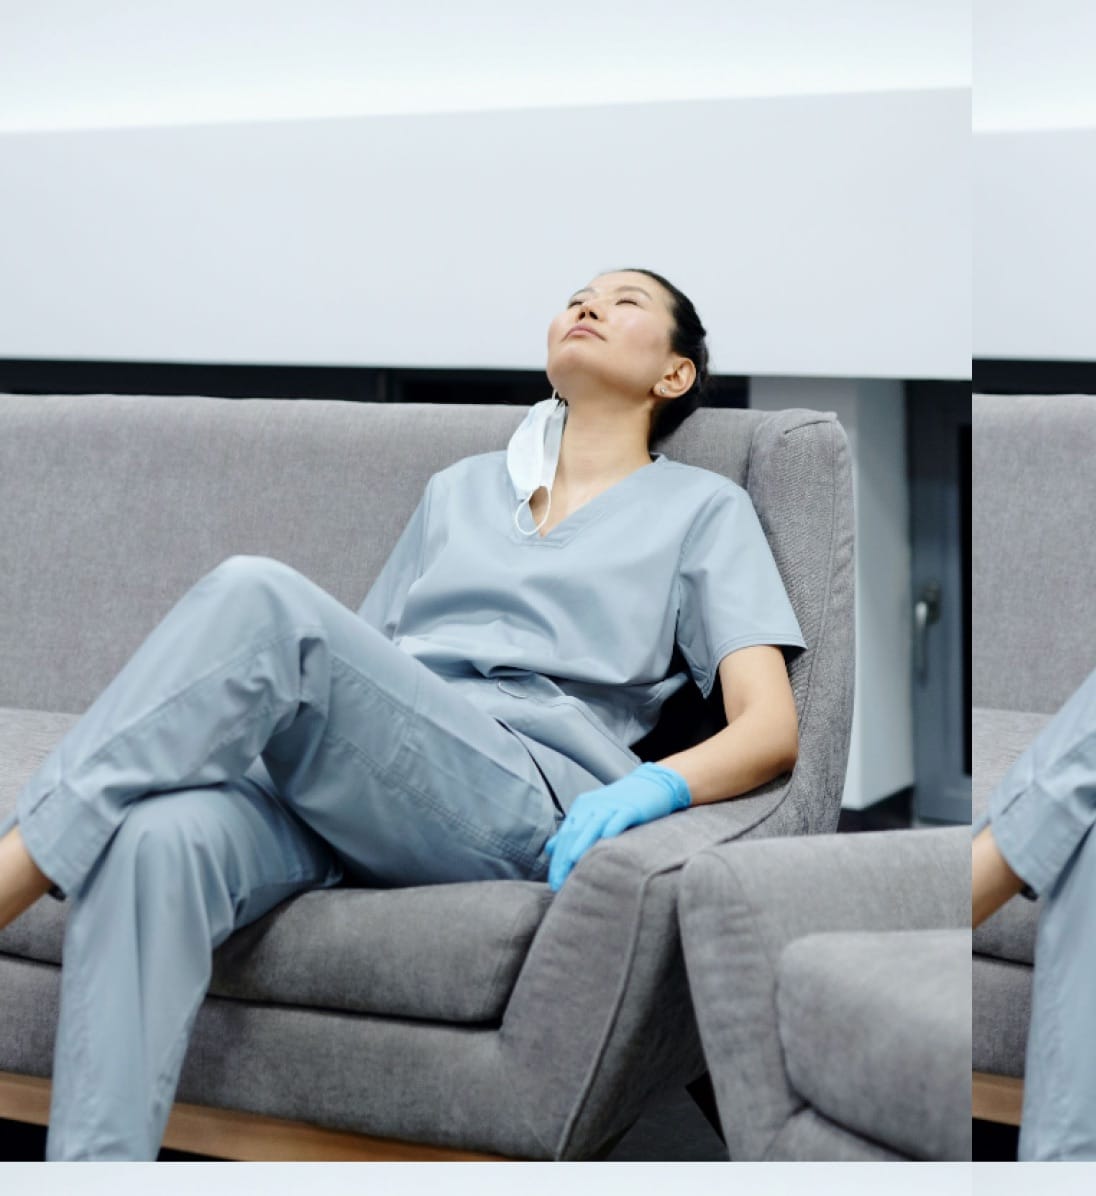 Nurse sitting cross legged on a couch, with head leaned back and eyes closed.